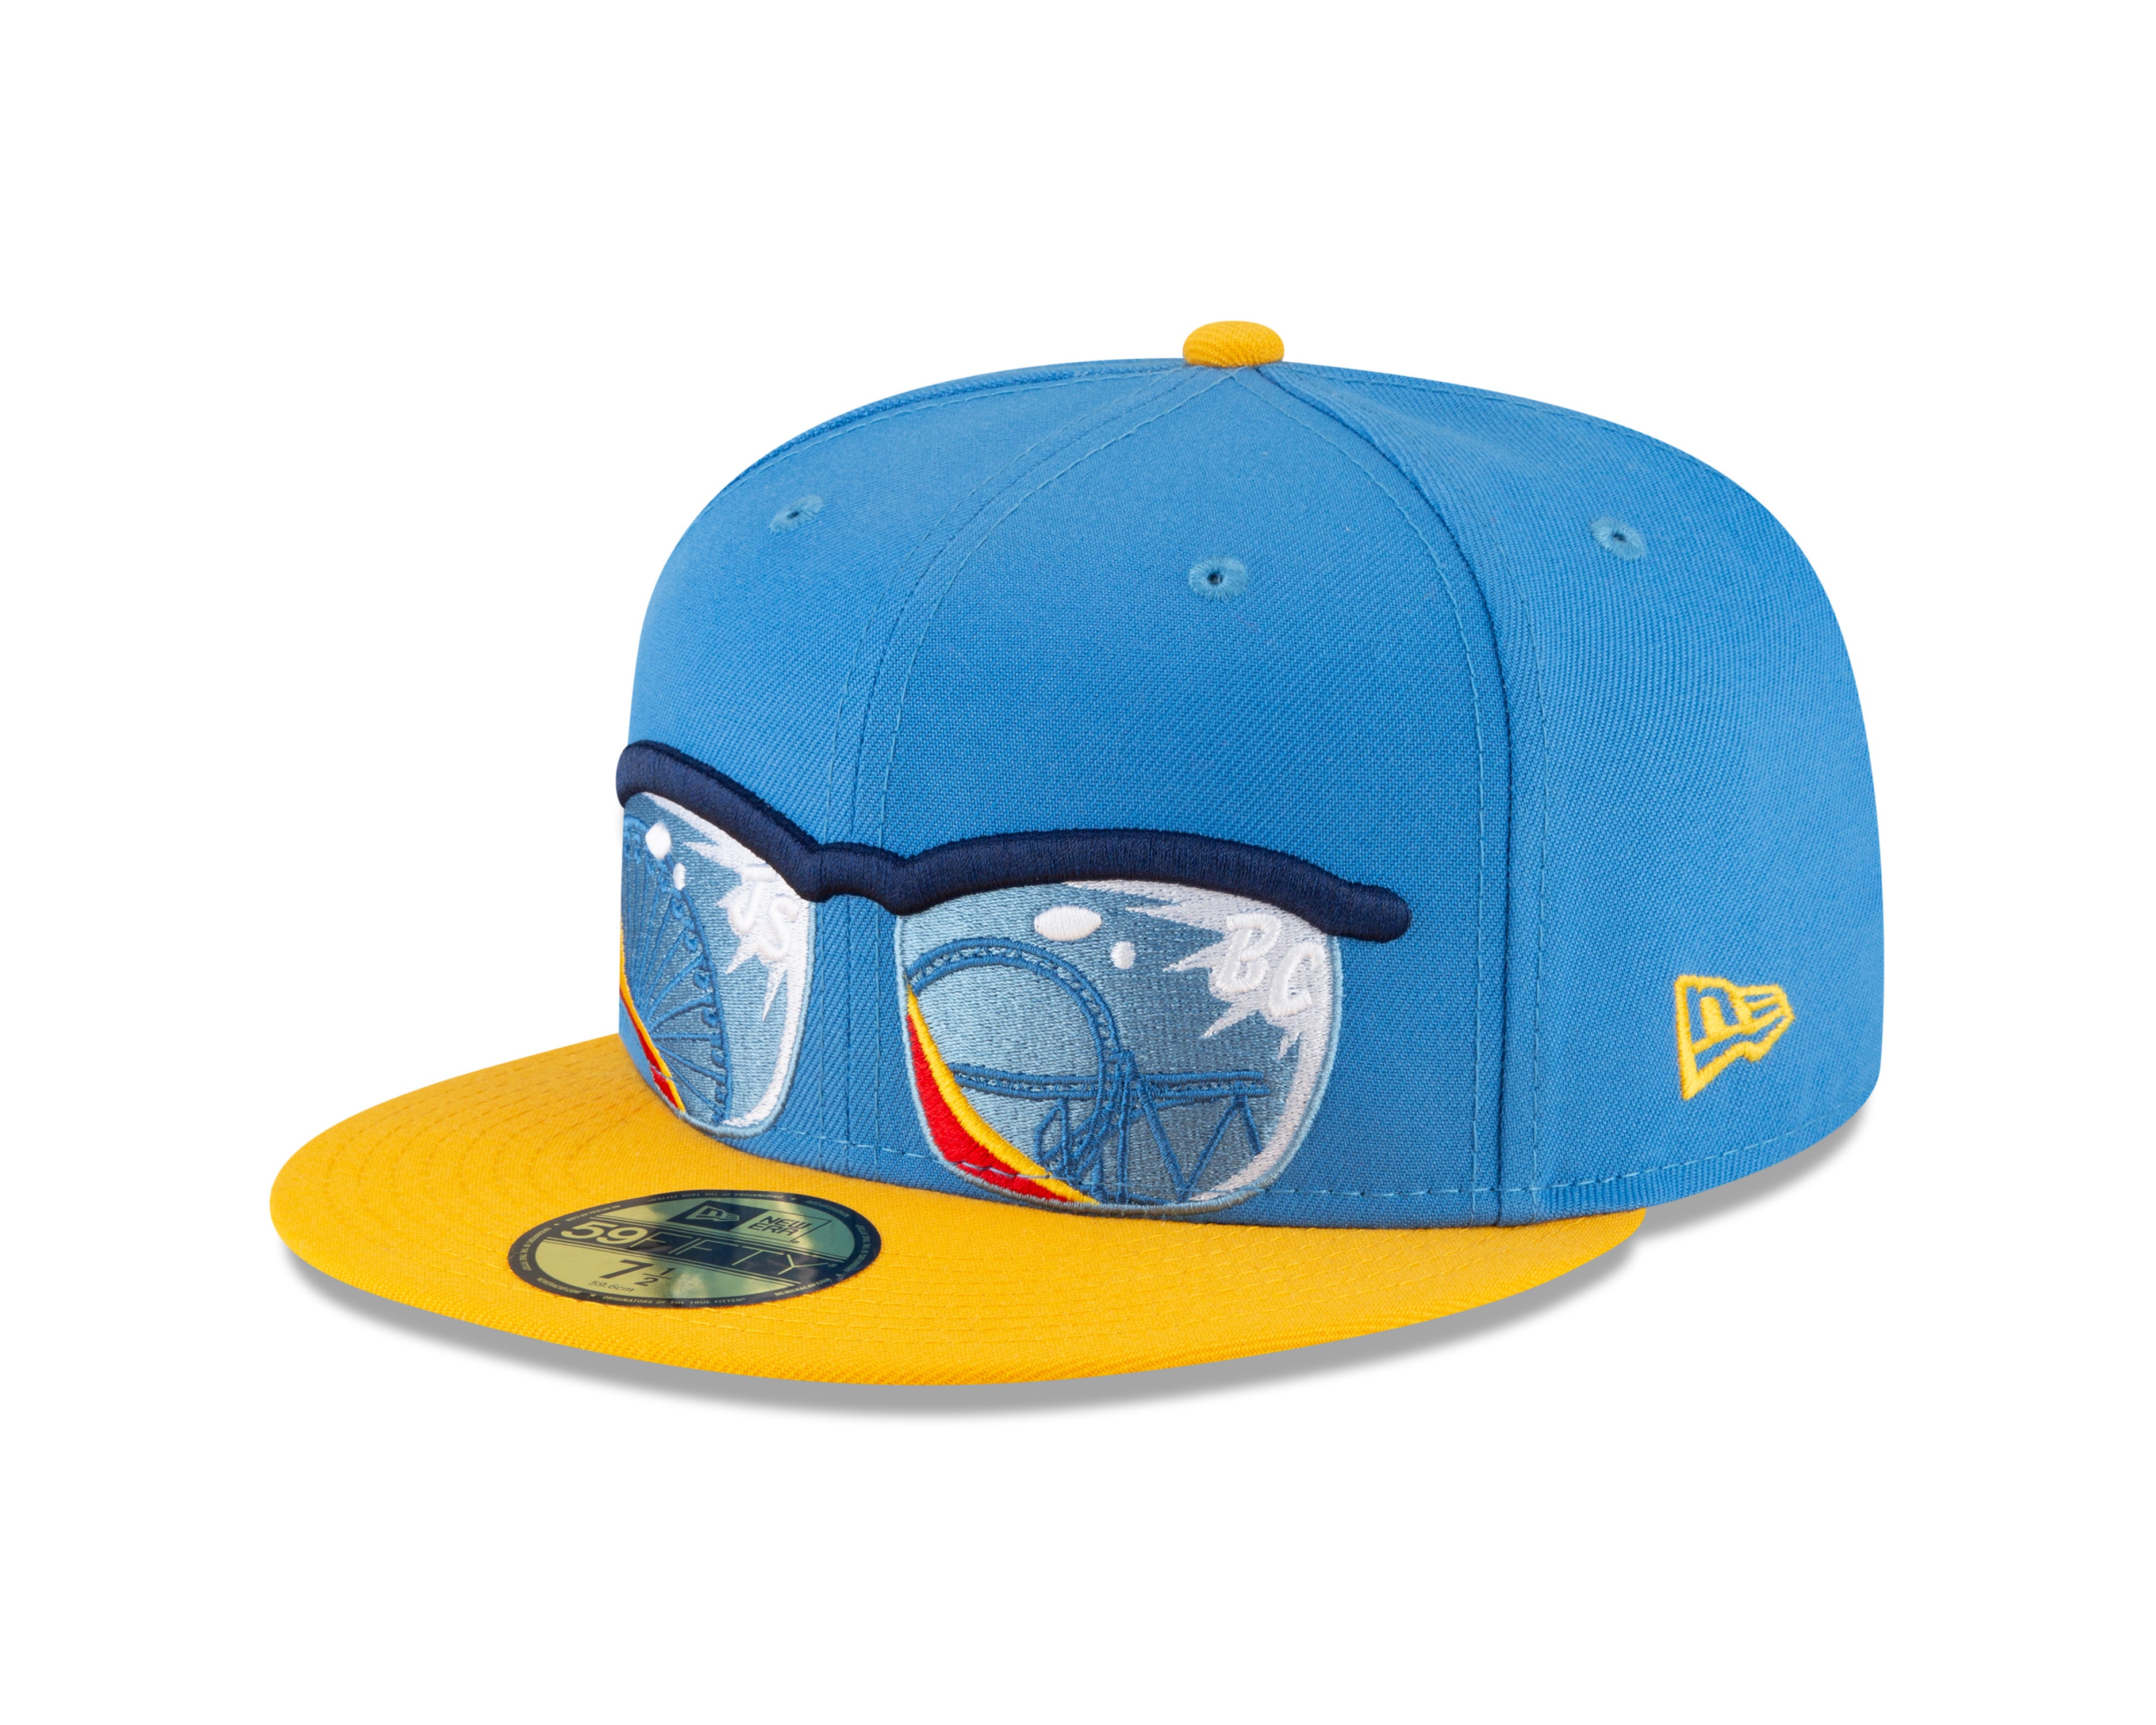 Jersey Shore BlueClaws Alternate 1 Fitted Hat Sunglasses 